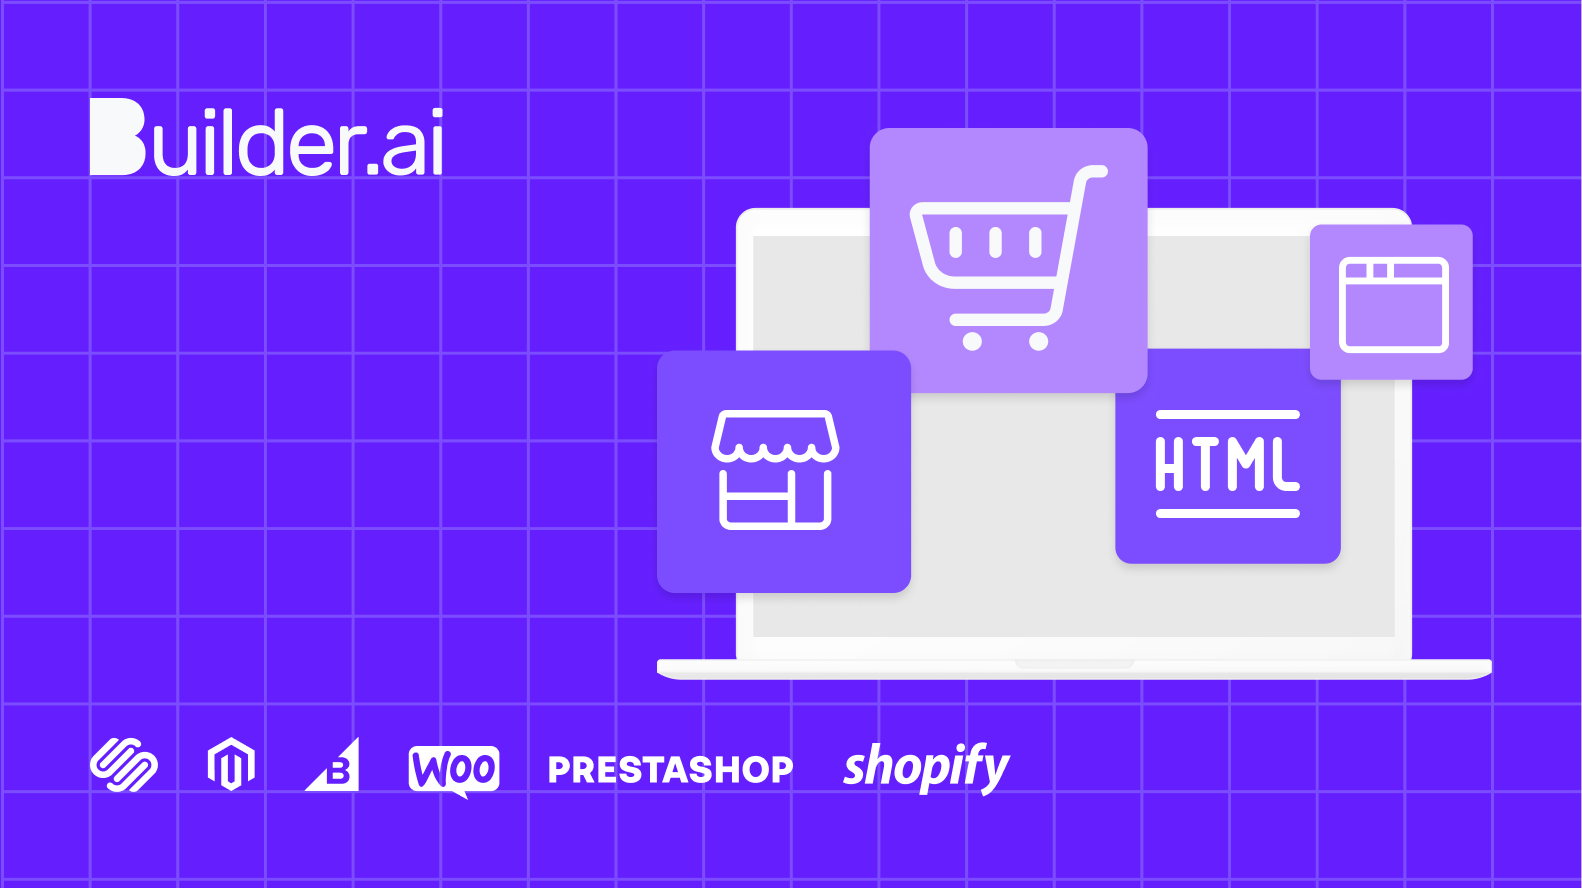 A concept of an online store depicting Wix alternatives like Builder.ai, Shopify, Prestashop, Woocommerce, Bigcommerce, Magento and Square Space